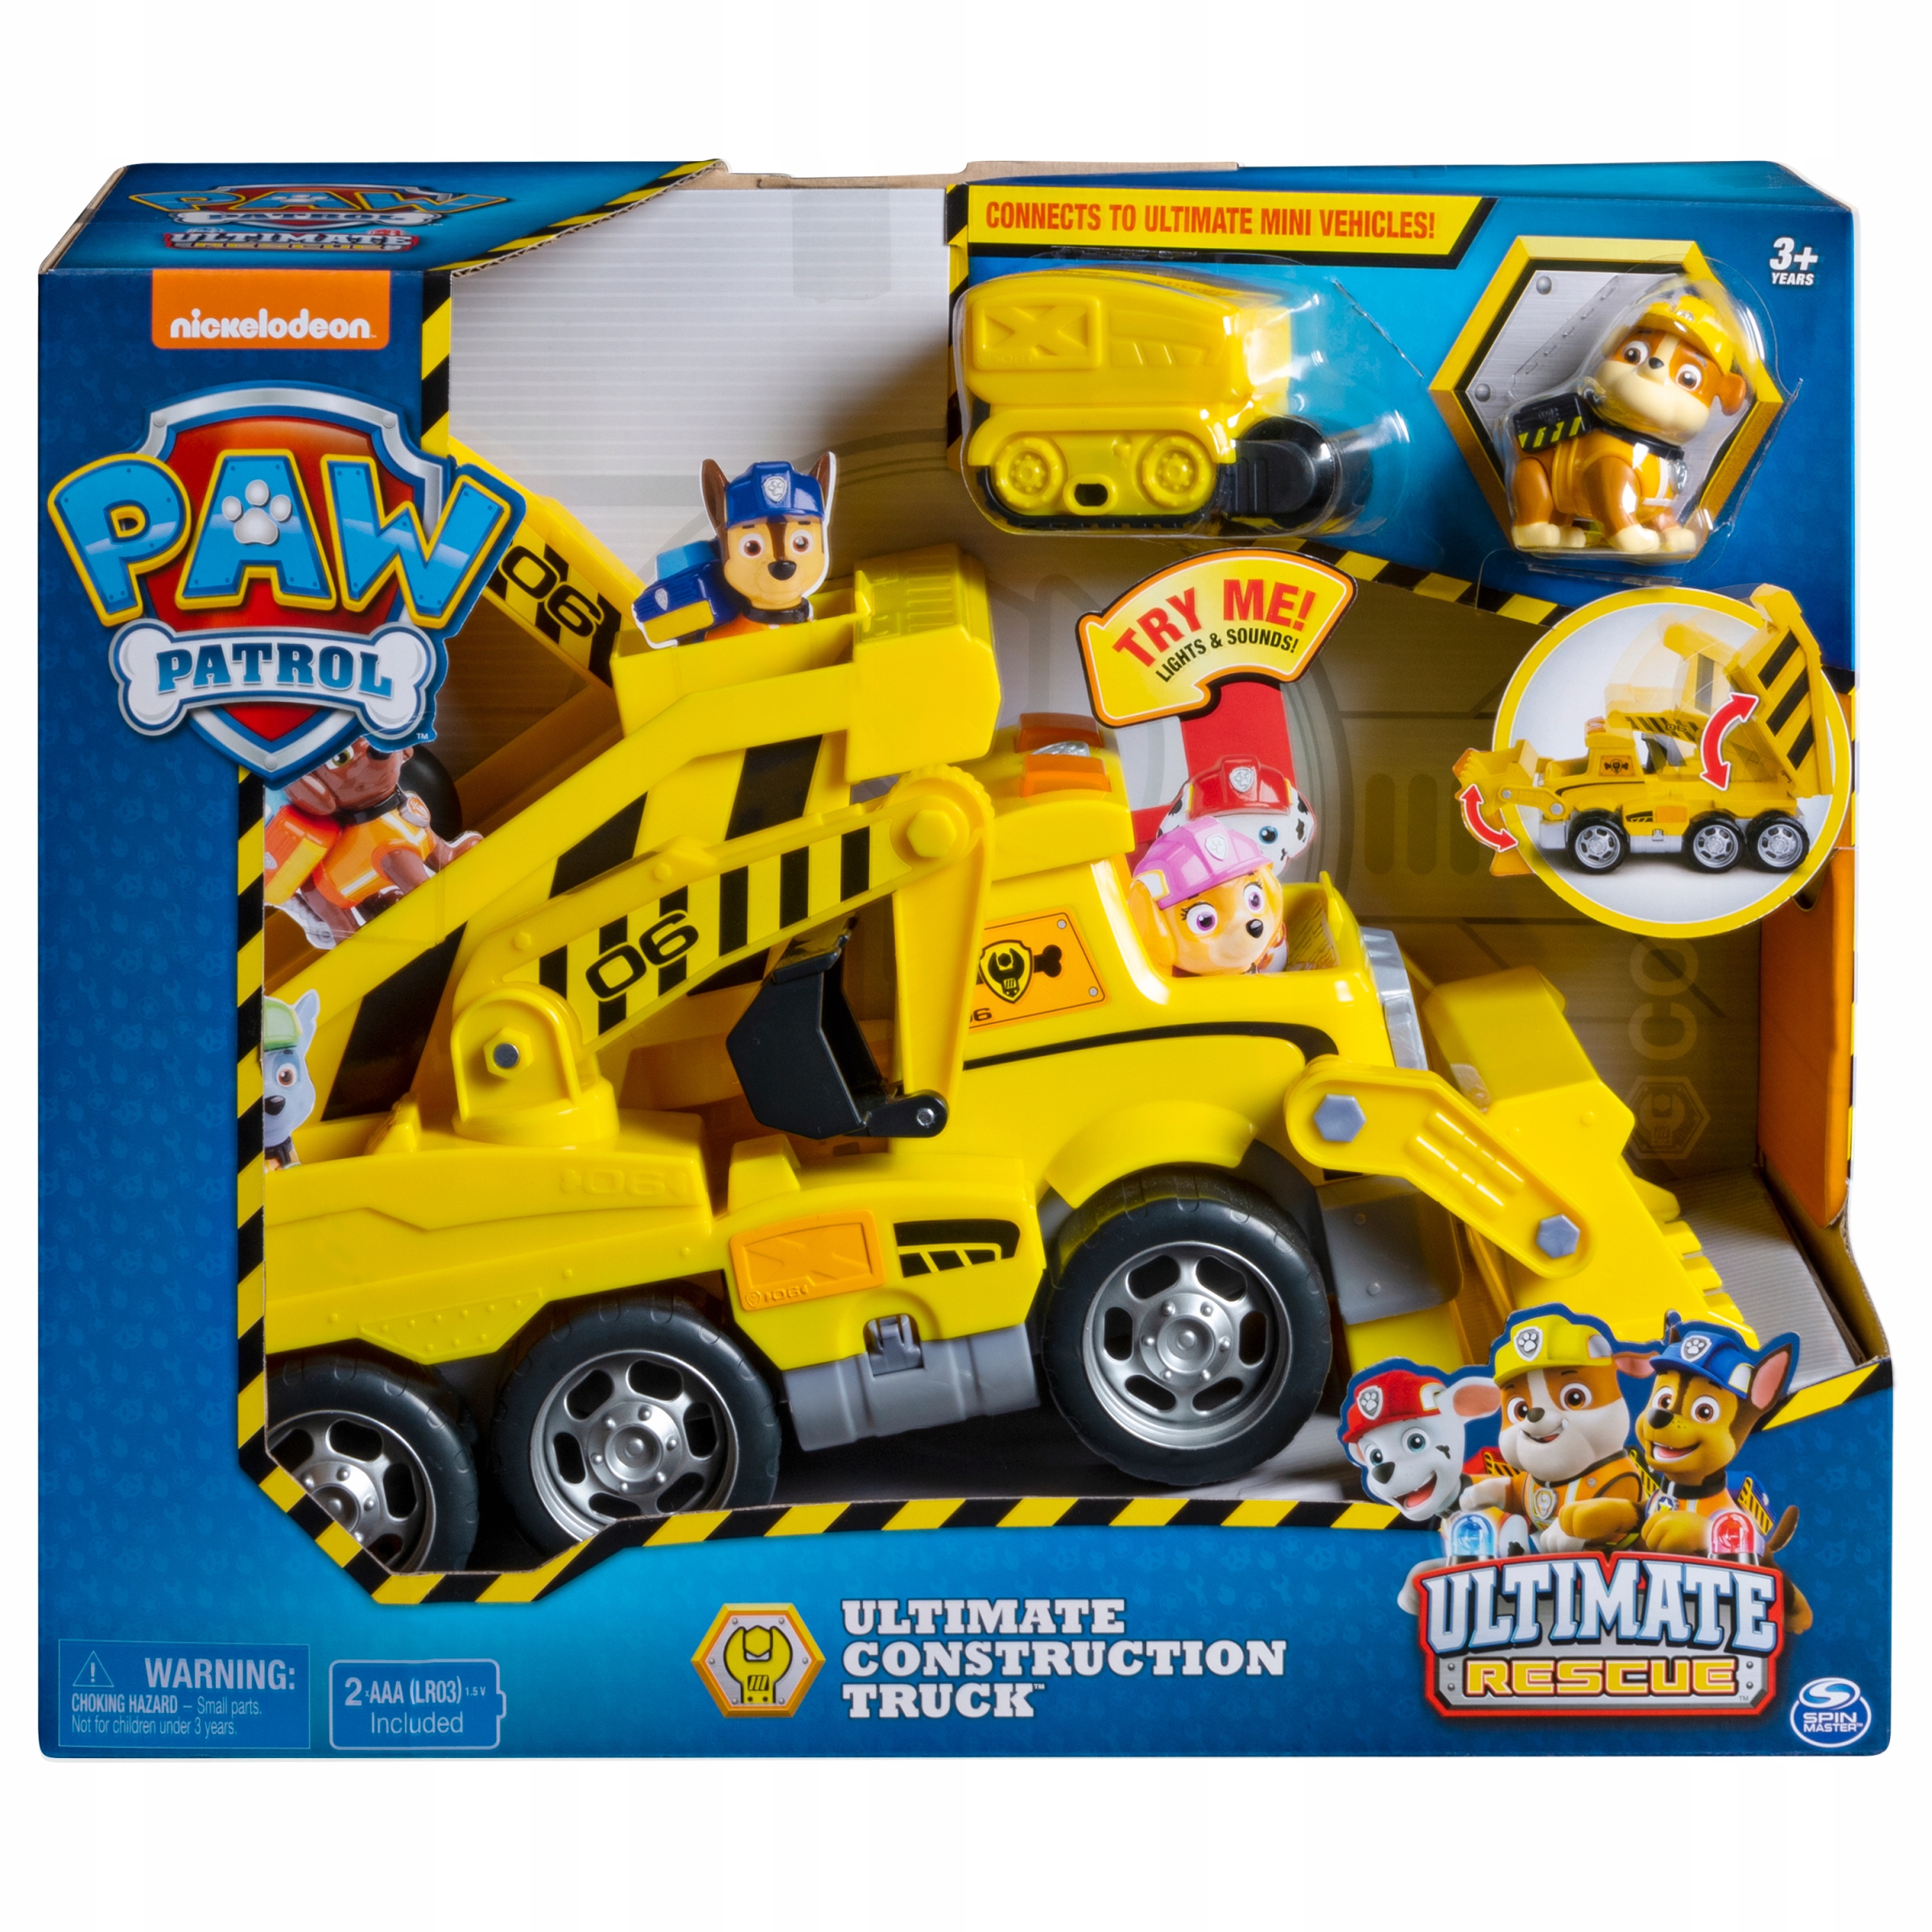 Paw Patrol 6046466 Ultimate Rescue Construction Truck Yellow For Sale